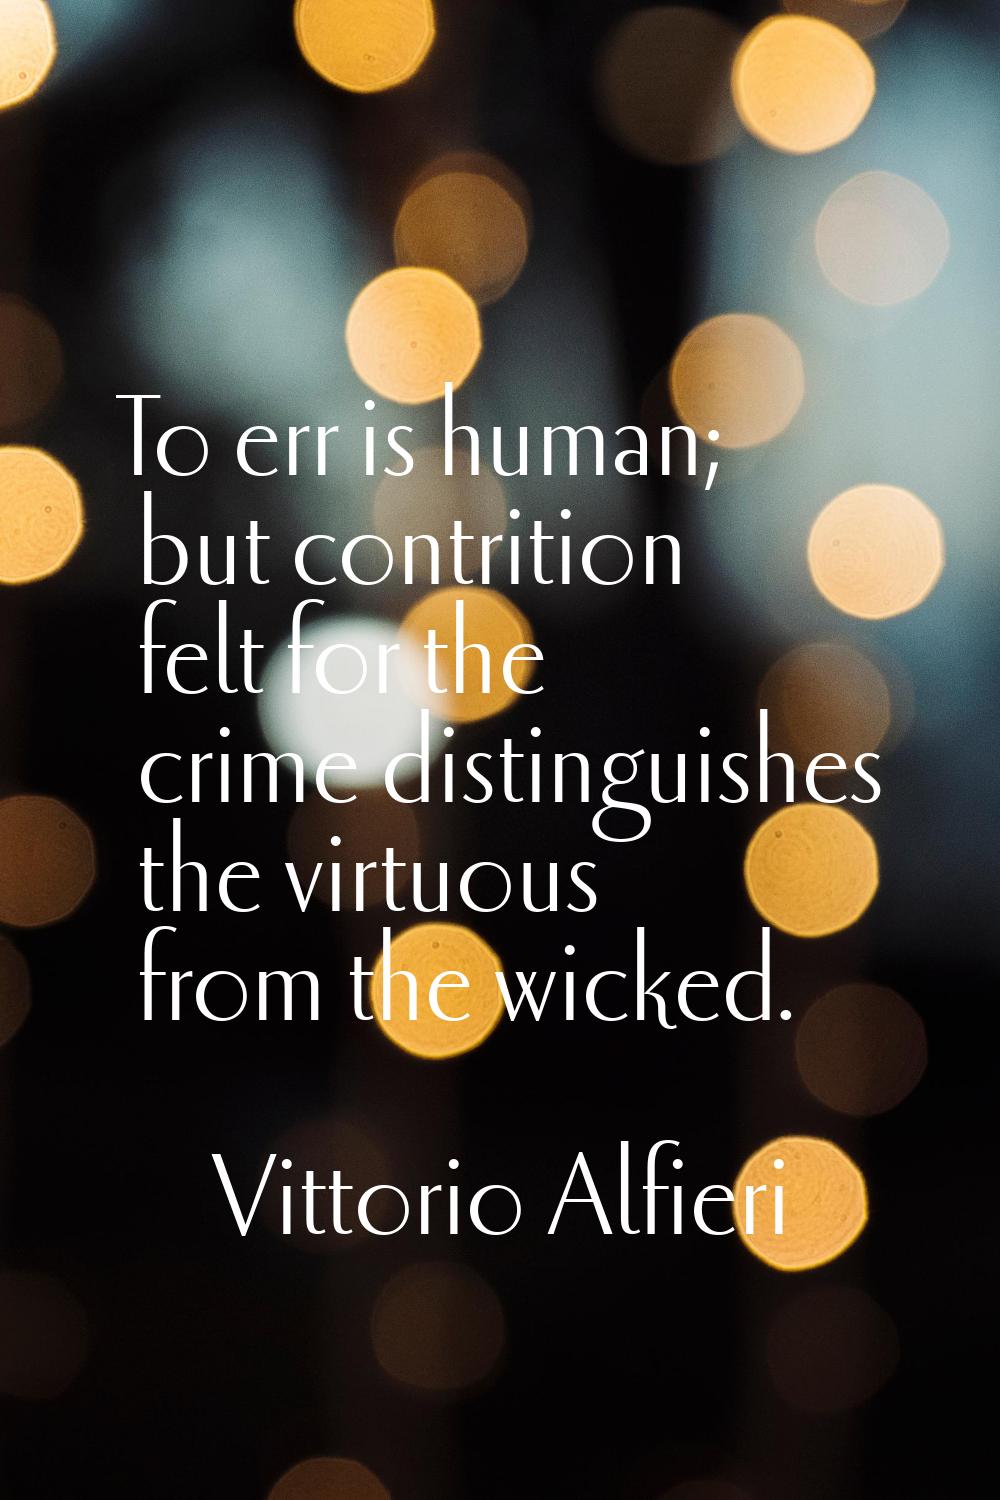 To err is human; but contrition felt for the crime distinguishes the virtuous from the wicked.